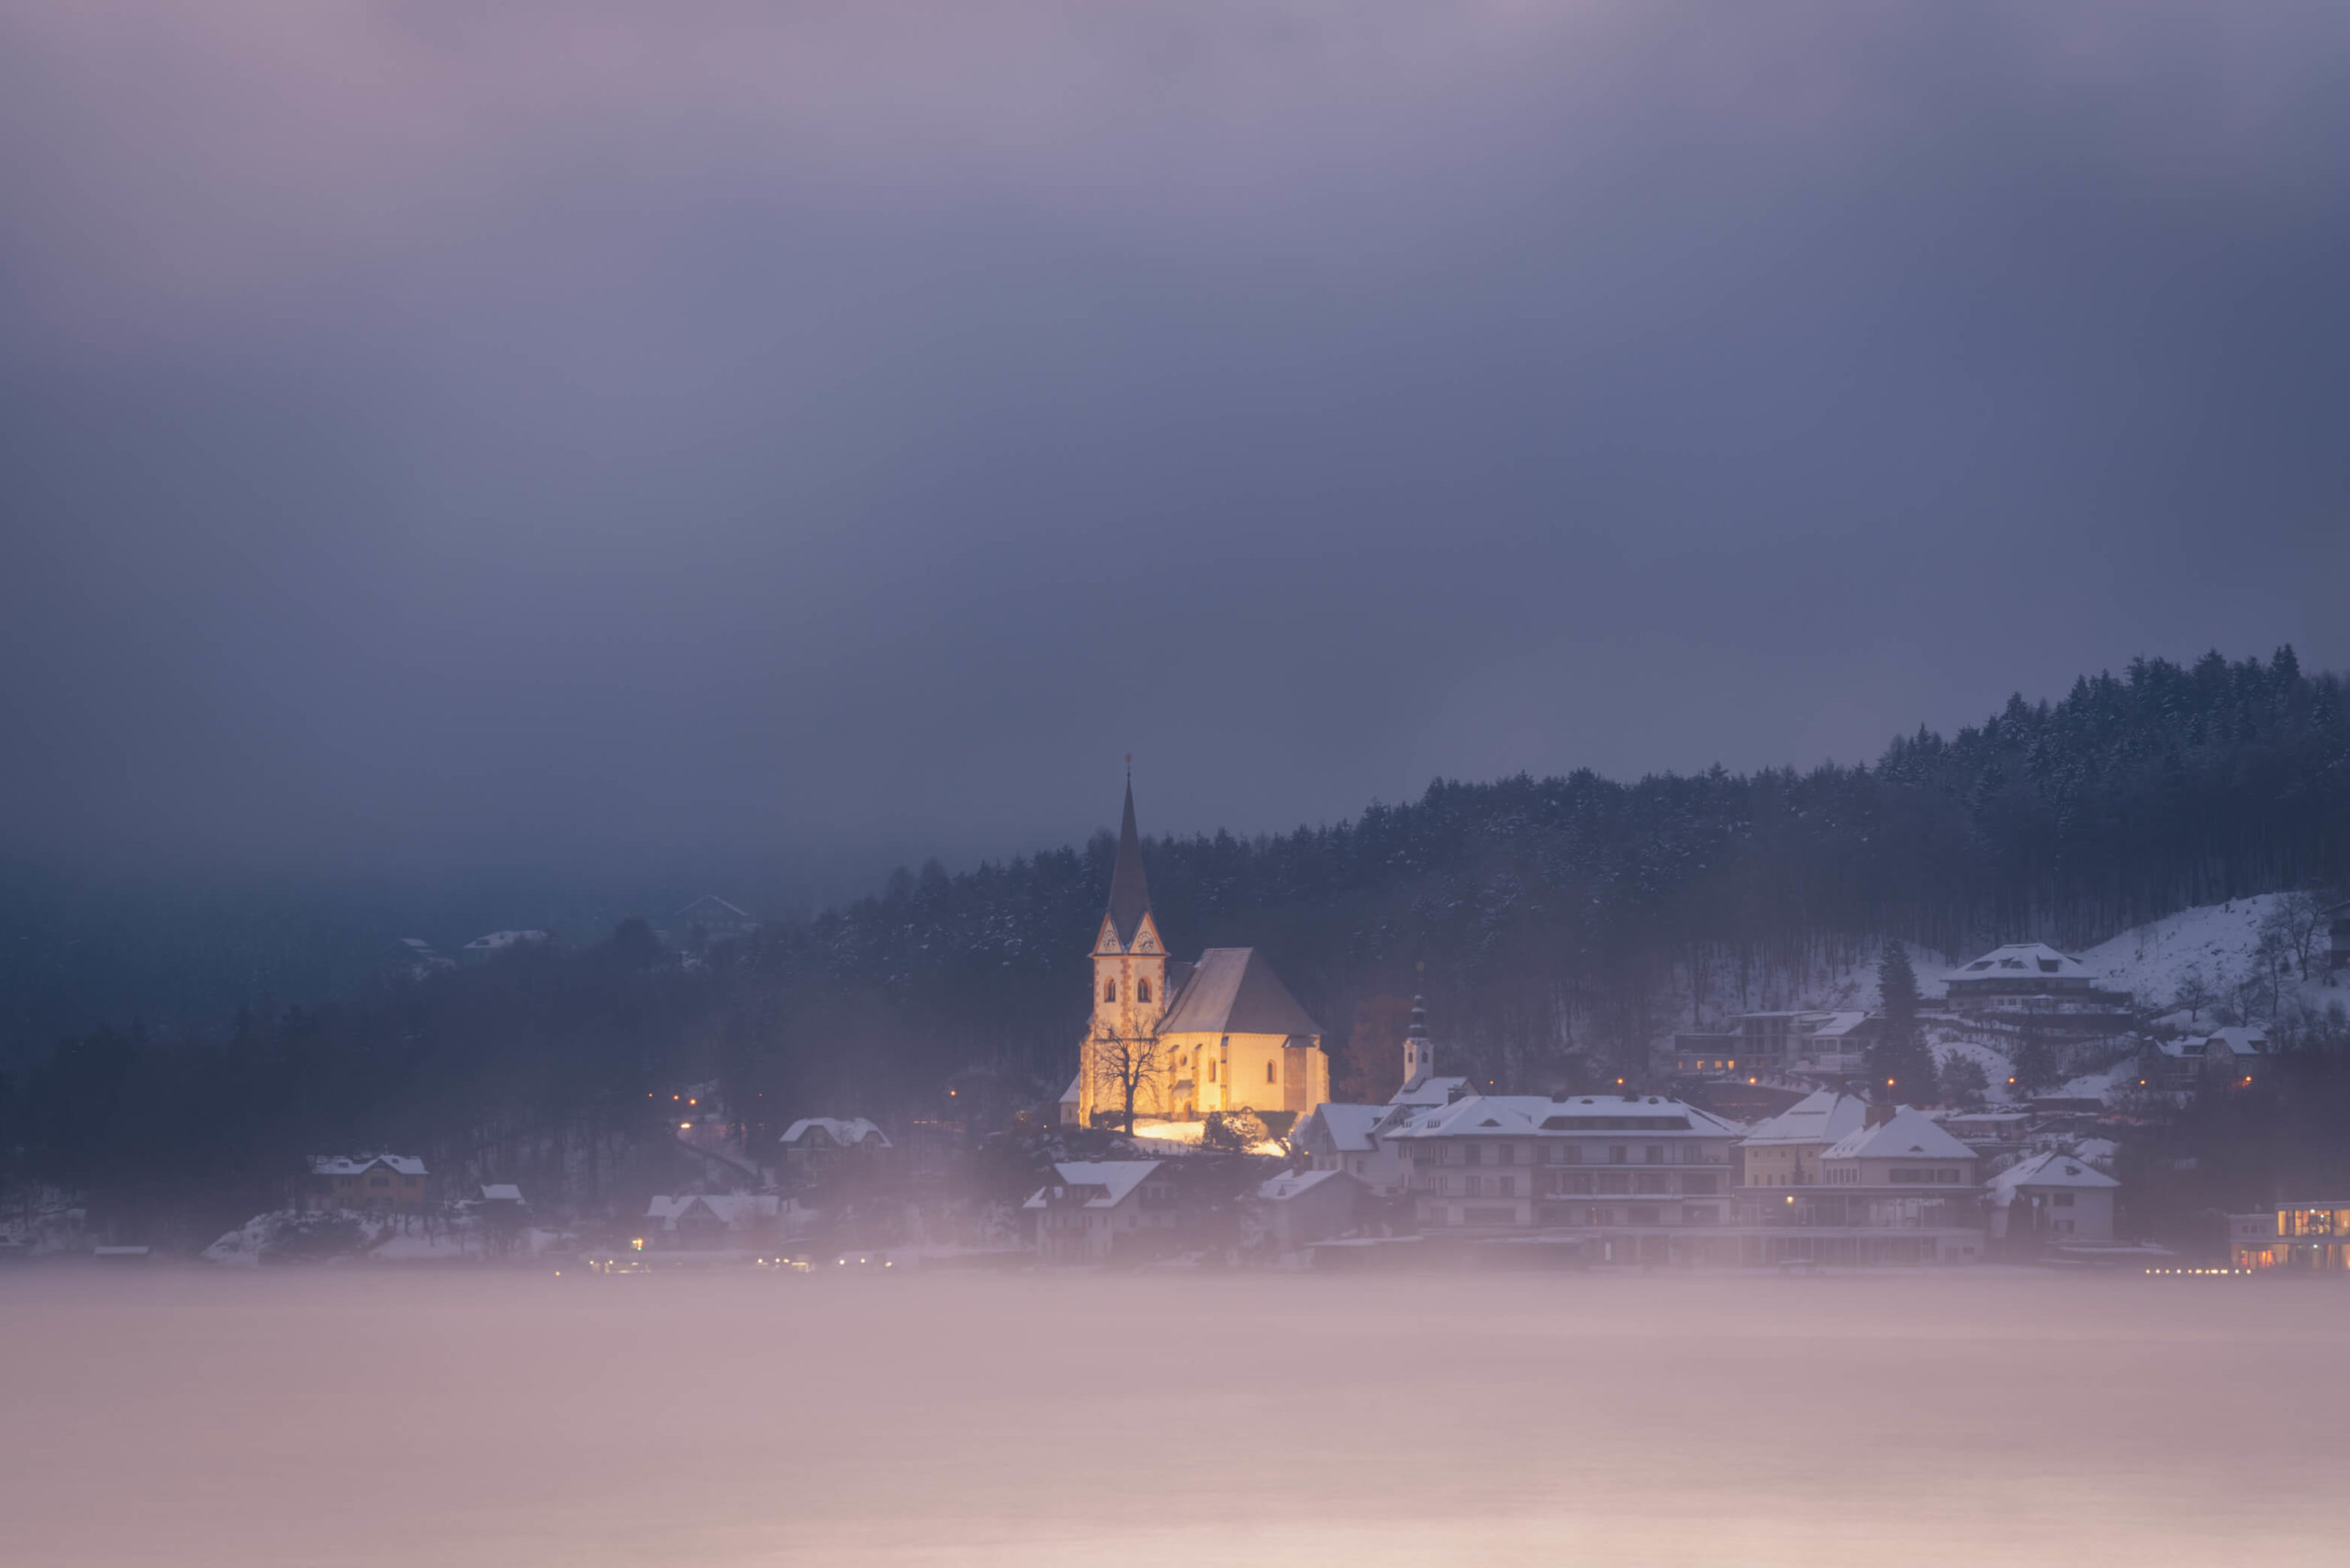 Thick cloud and fog on a turbulent morning at lake Wörthersee with illuminated church of Maria Wörth, Carinthia